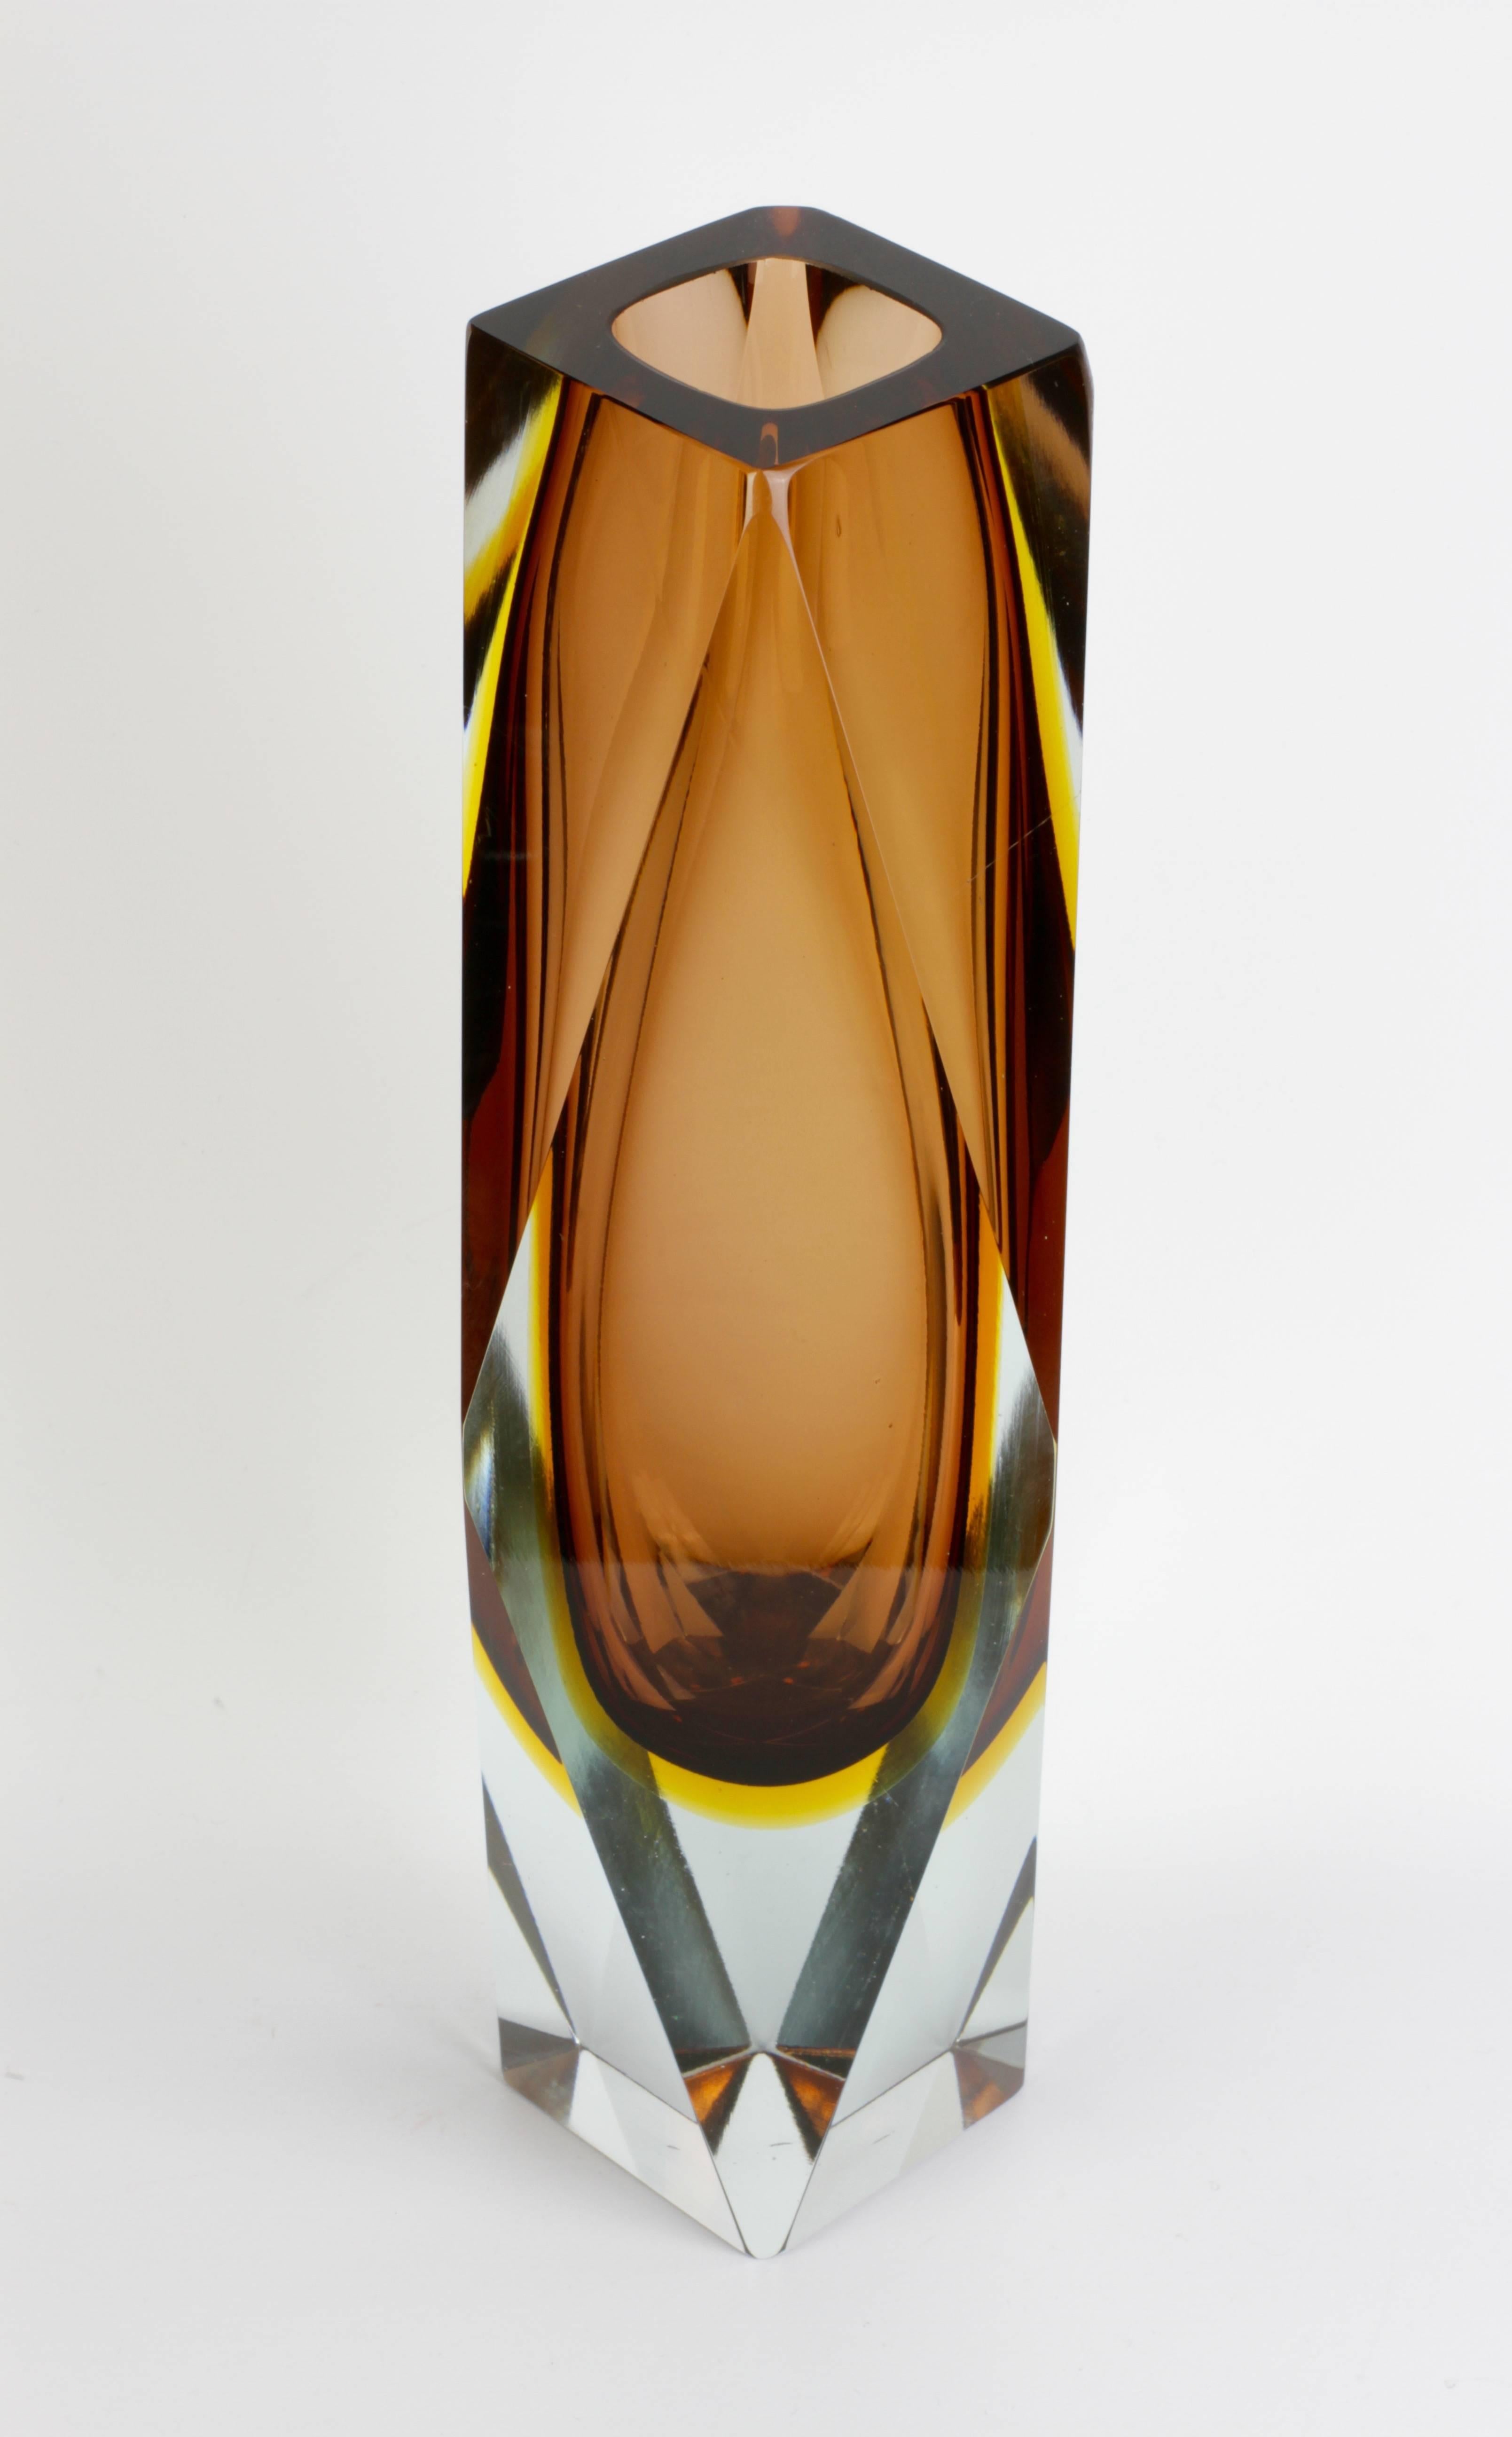 This monumentally large Italian Mid-Century Modern Murano glass vase, circa 1960 - 1980. Exceptional in every way, commanding you to admire its stunning design and masterful production. Faceted on four sides and utilizing the Sommerso technique over